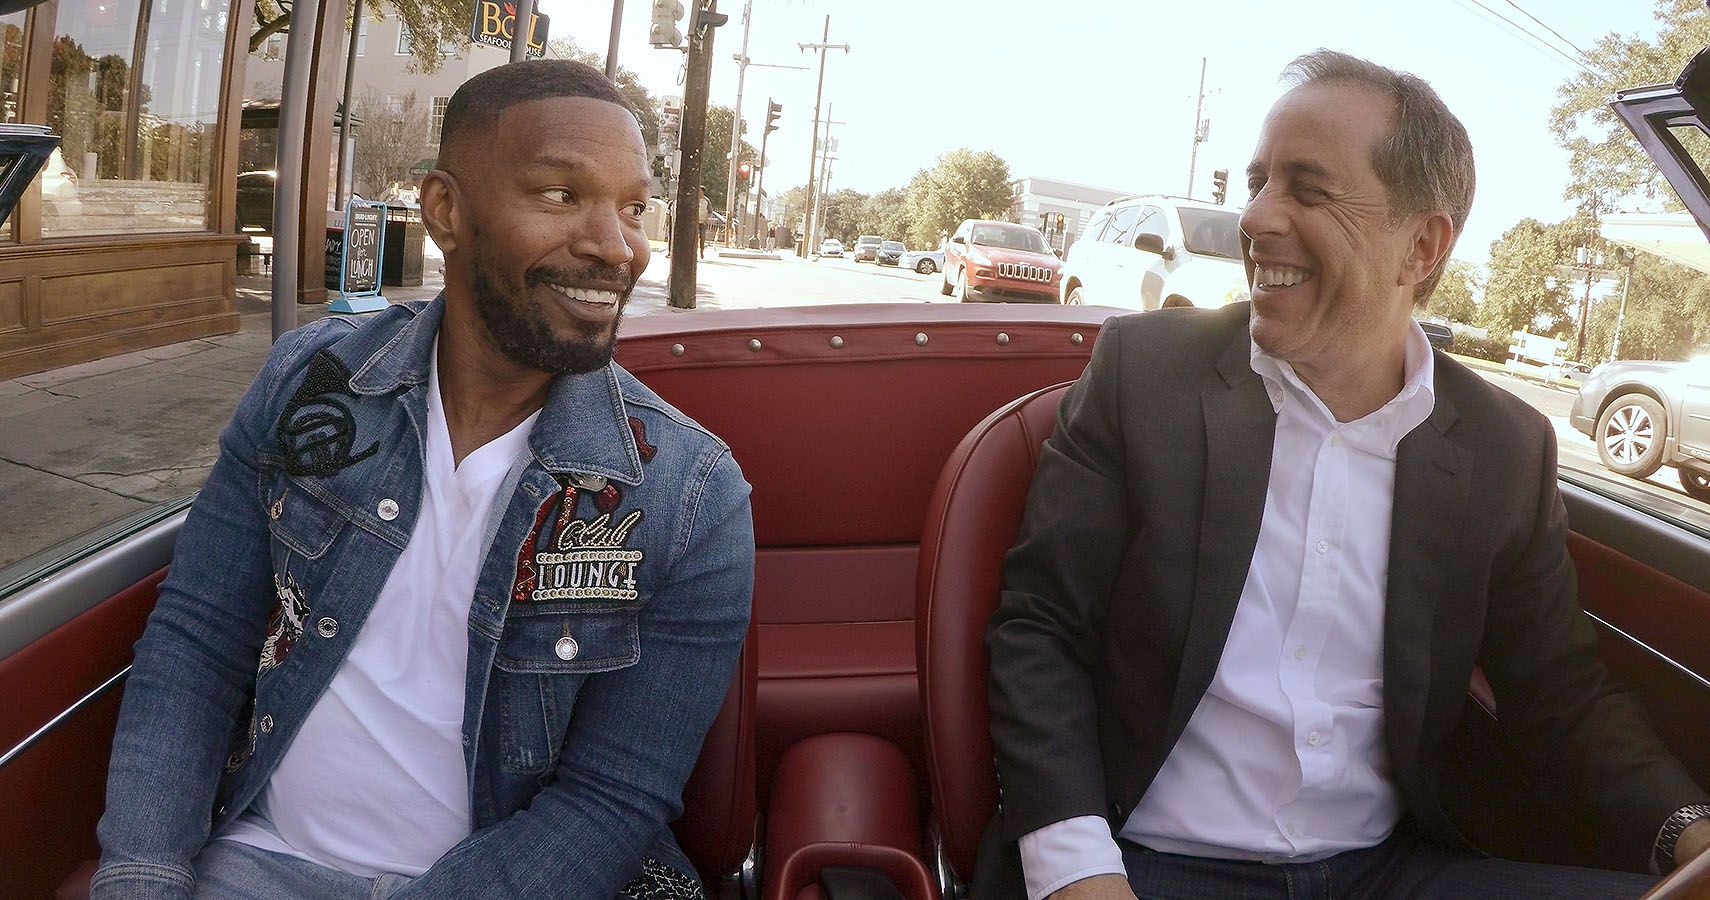 Comedians in Cars Getting Coffee: Cars, Comedy & Coffee